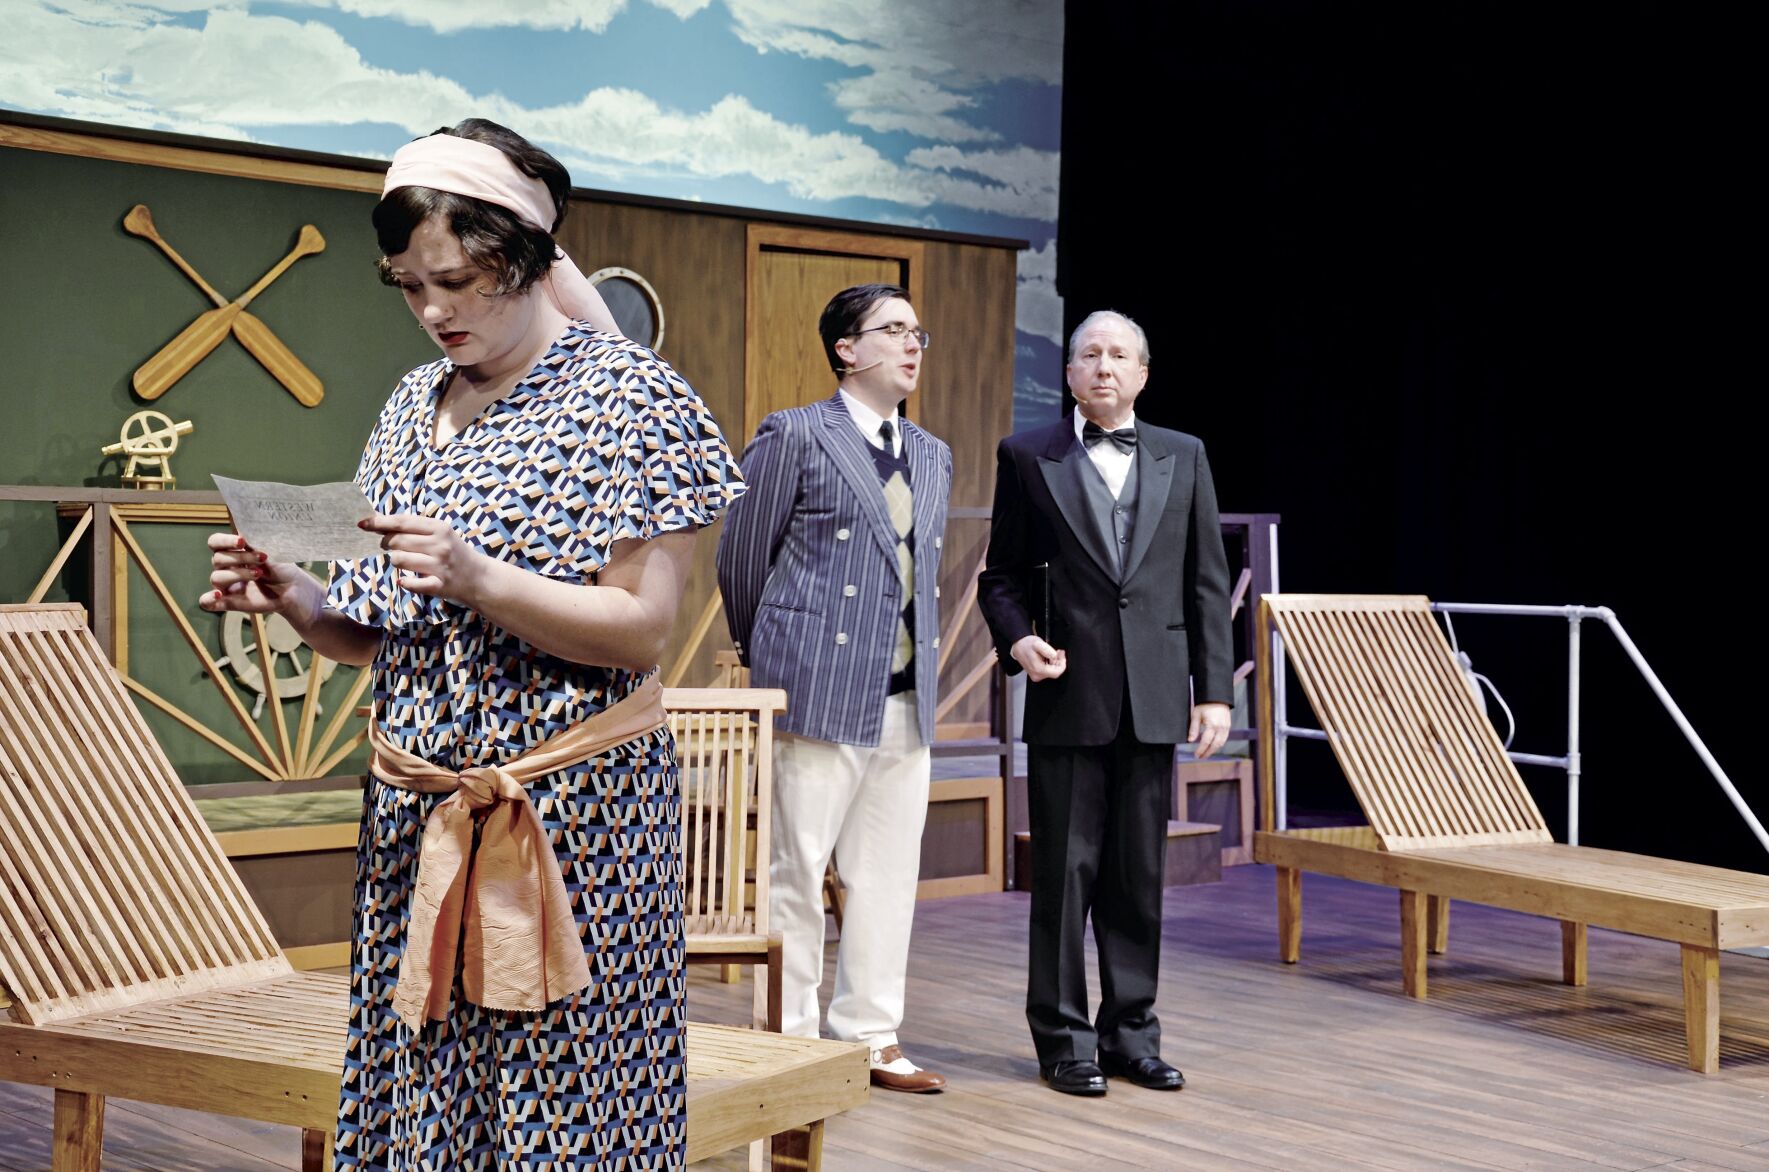 Comedy of 'Jeeves at Sea' rings true